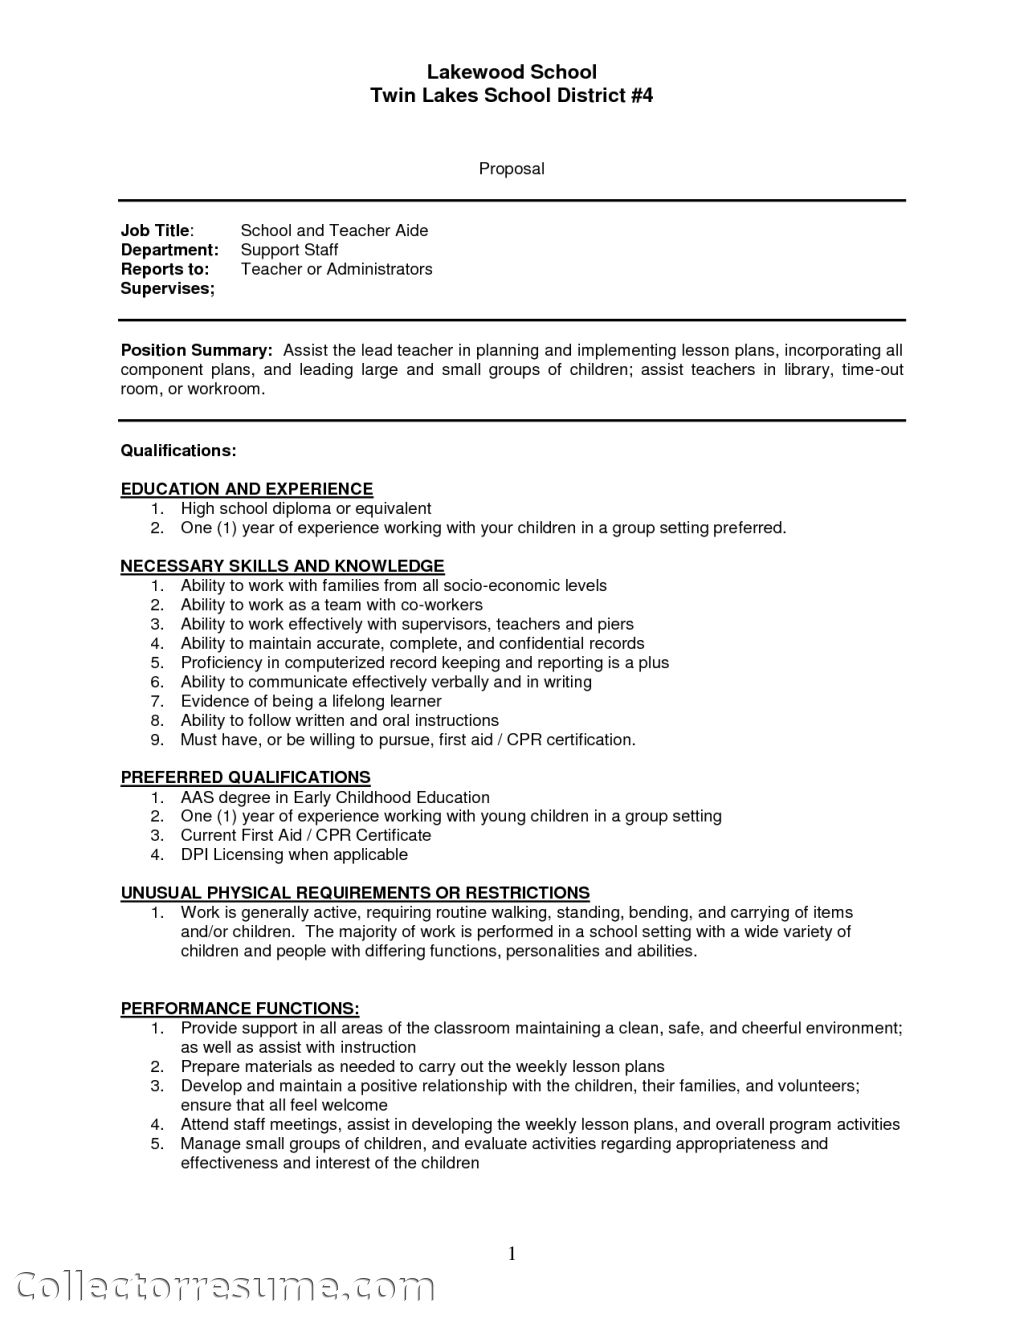 sample resume experience 1 year